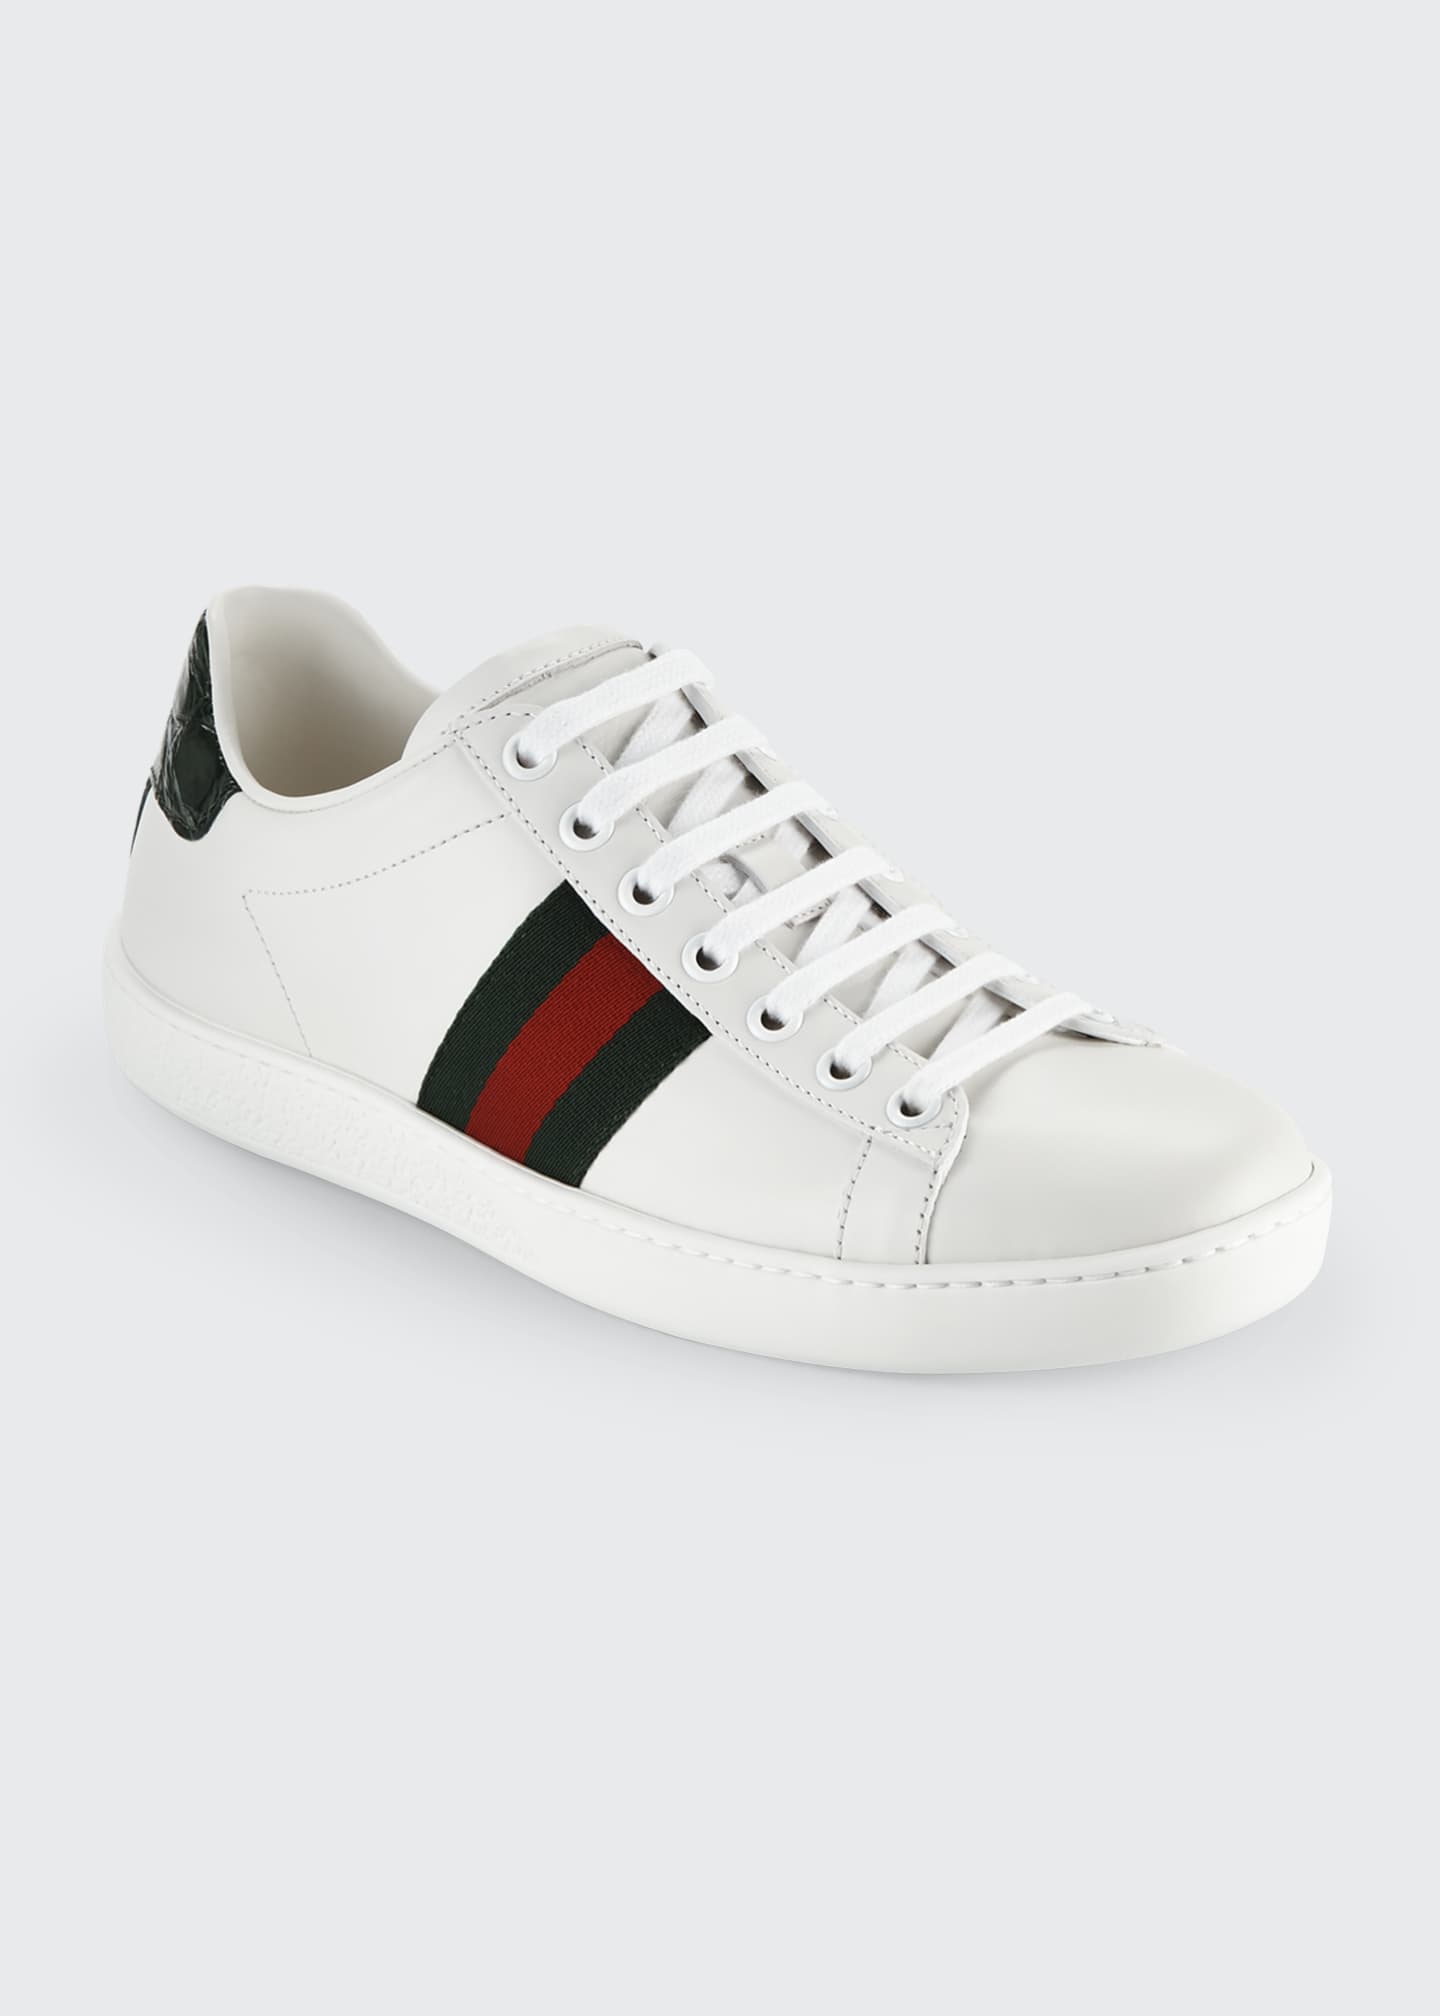 Gucci Ace Star & Bee Sneakers Image 3 of 5